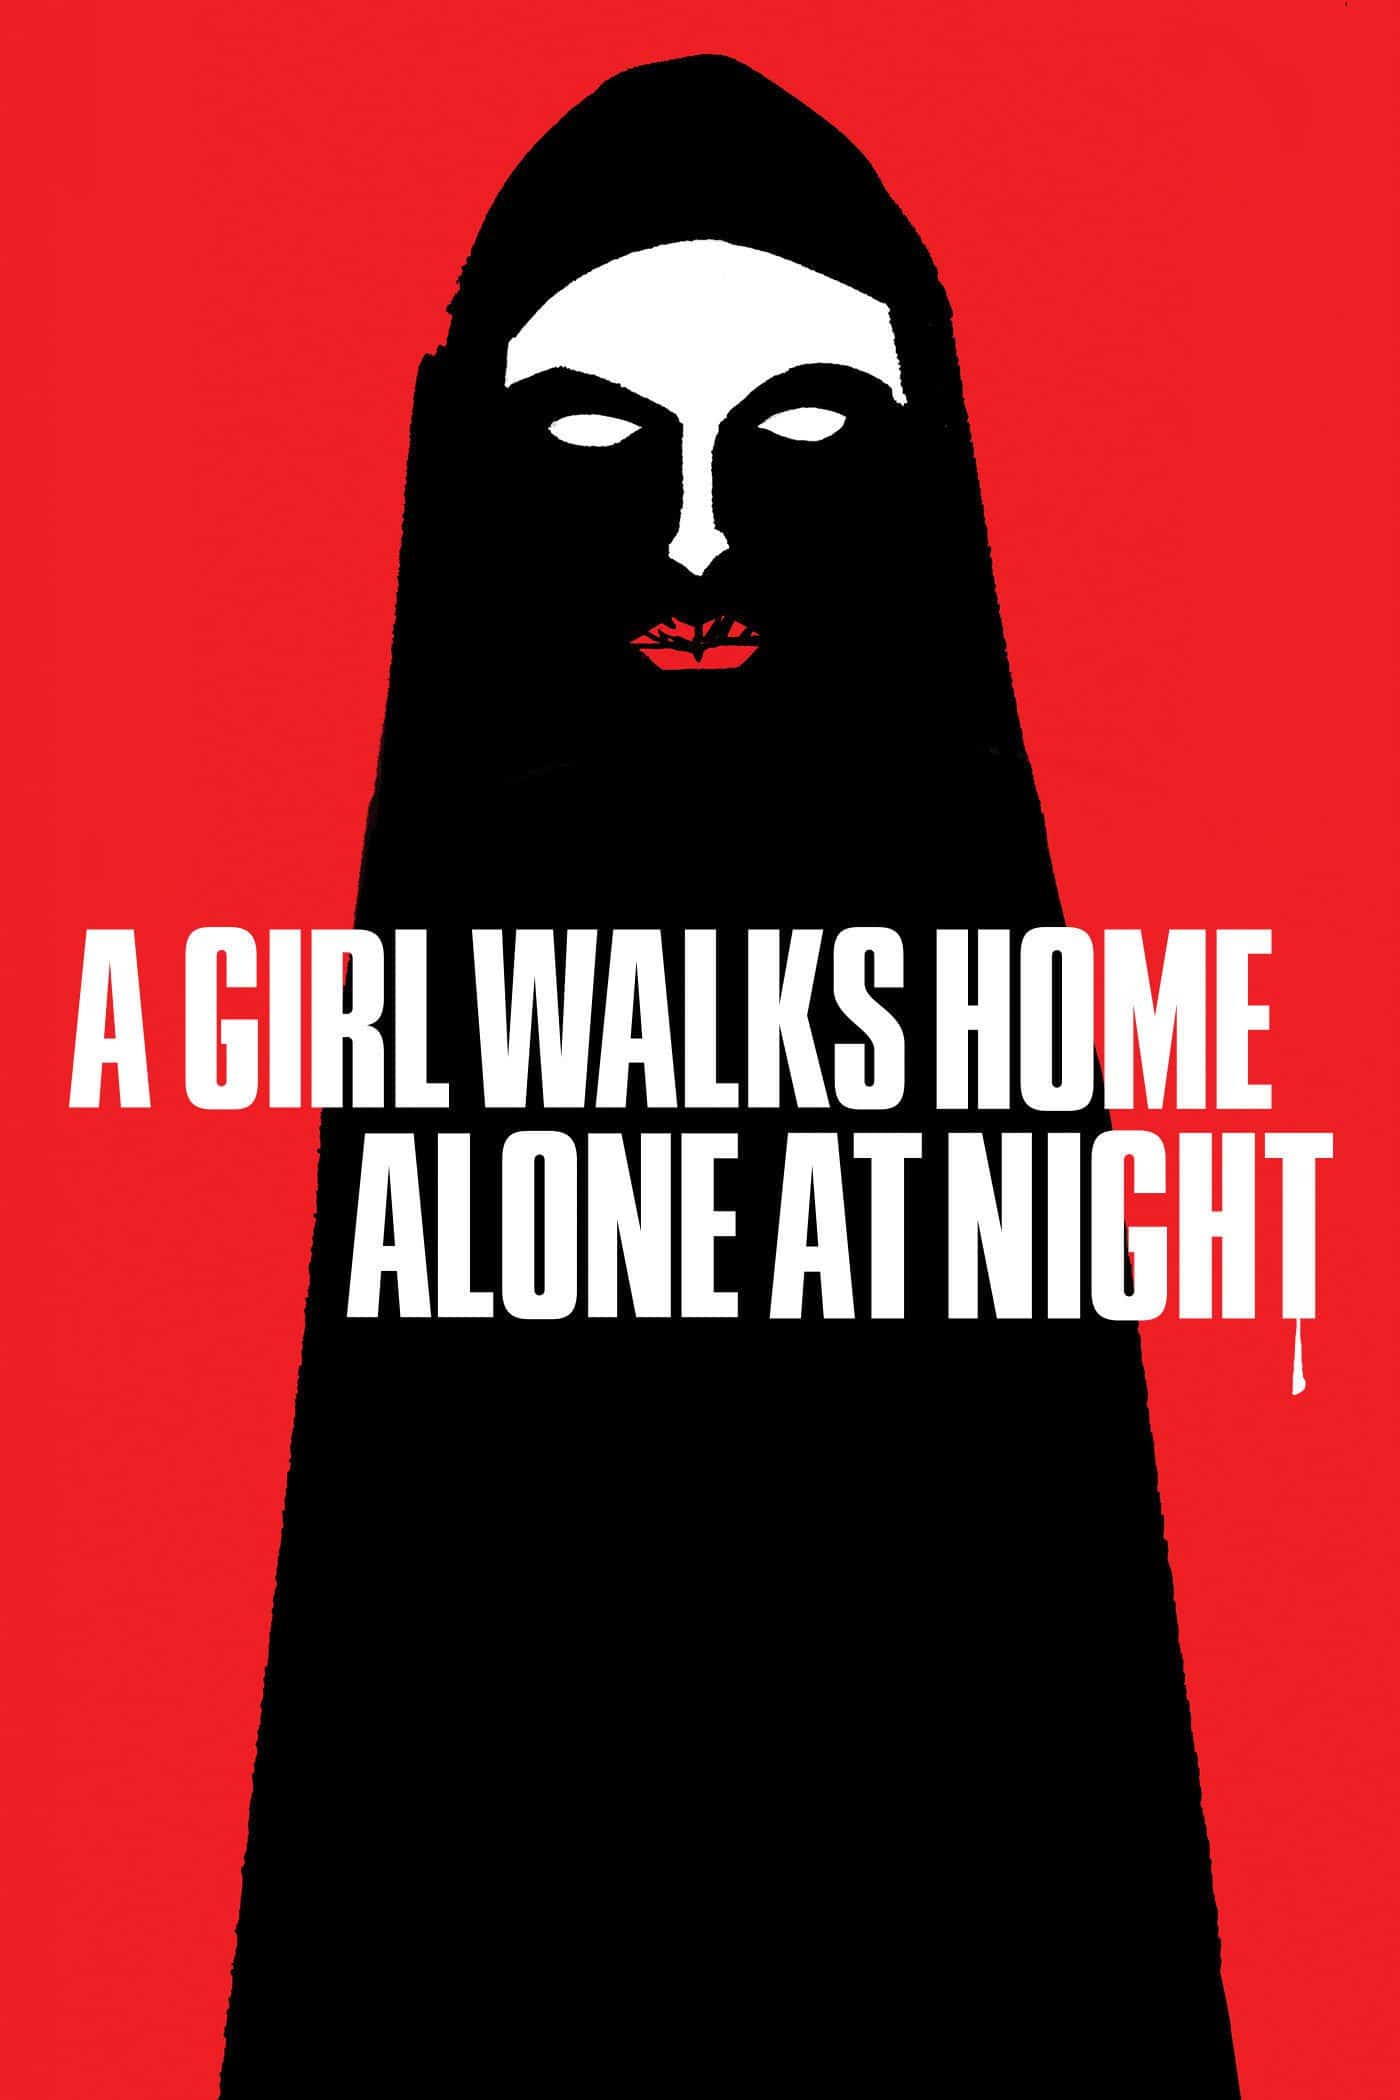 A Girl Walks Home Alone at Night, 2014 